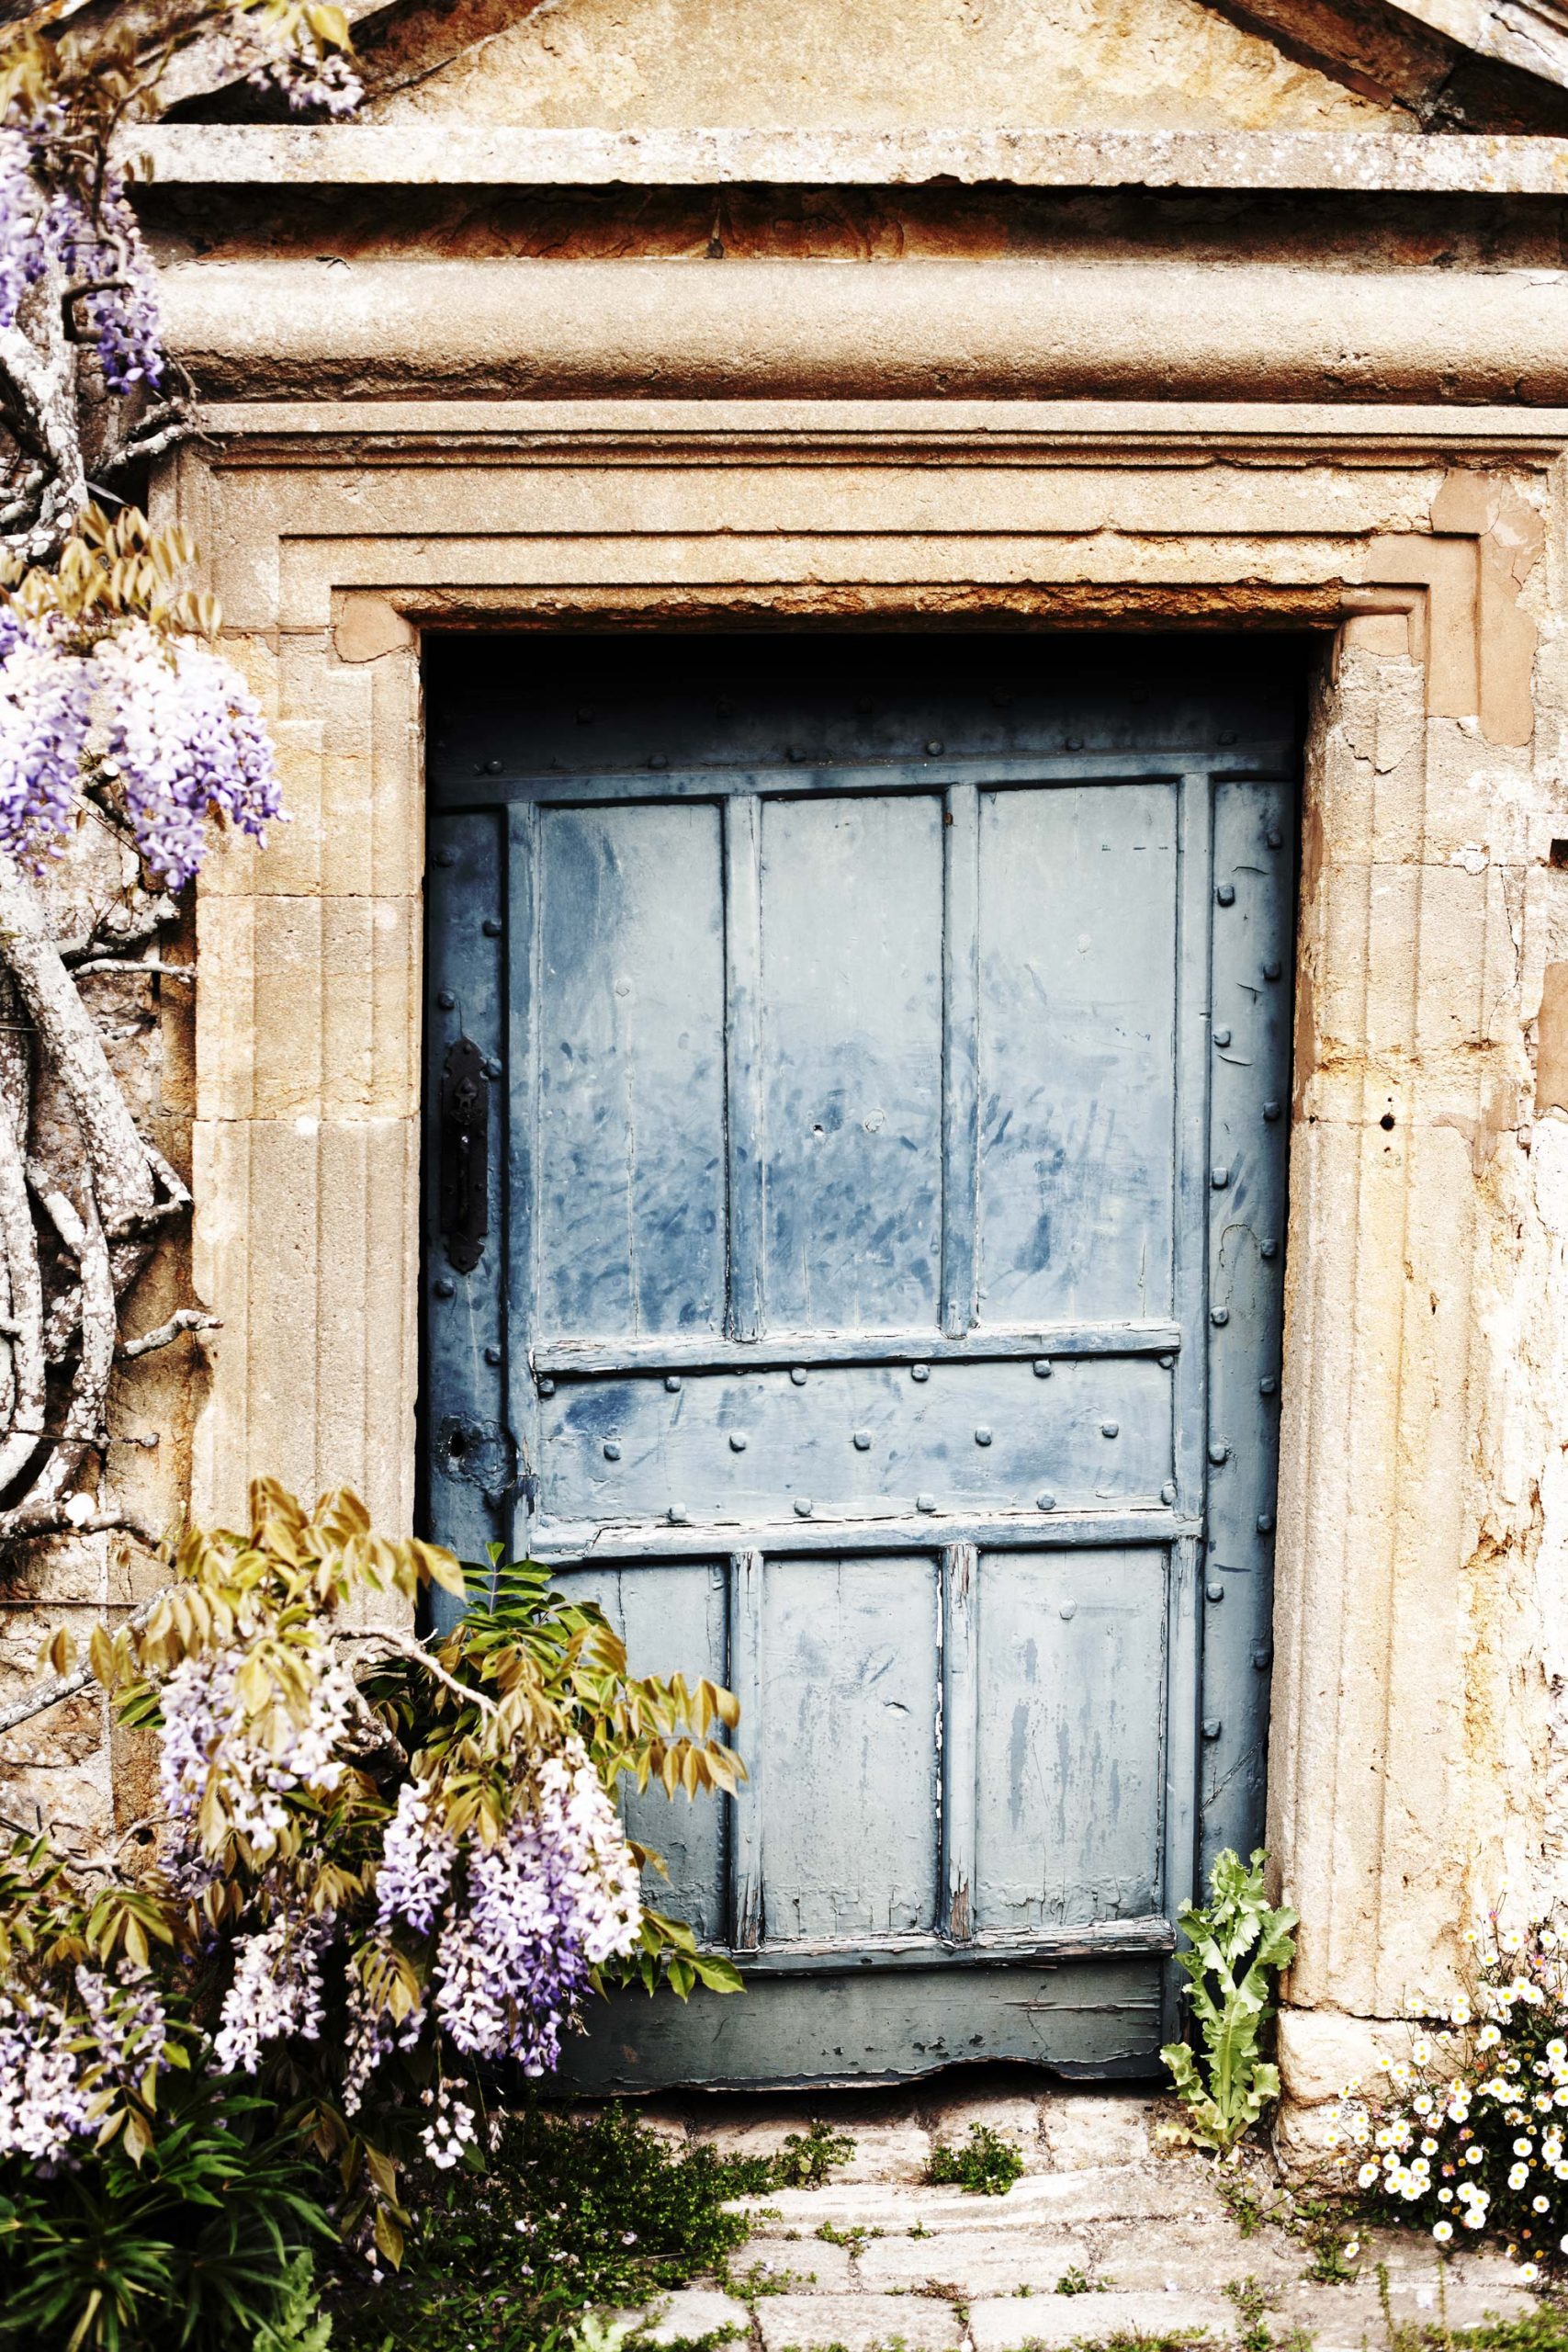 A quirky door in an Elizabethan home in Shaftesbury